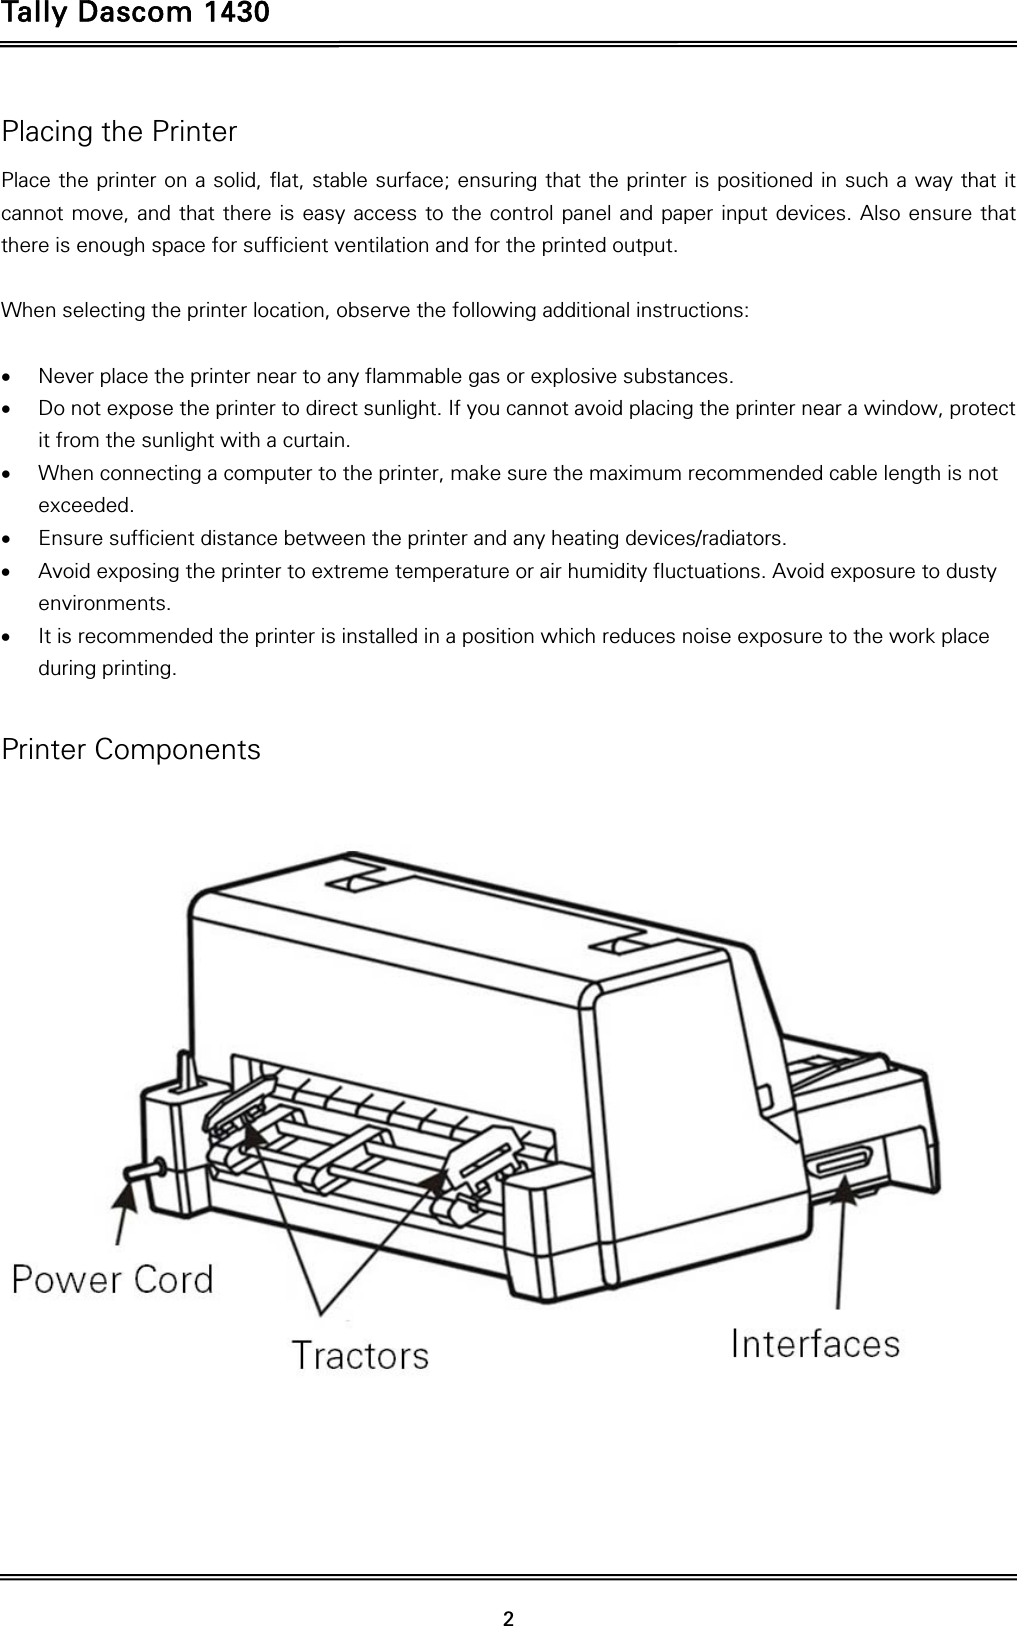 Tally Dascom 1430   2  Placing the Printer Place the printer on a solid, flat, stable surface; ensuring that the printer is positioned in such a way that it cannot move, and that there is easy access to the control panel and paper input devices. Also ensure that there is enough space for sufficient ventilation and for the printed output.  When selecting the printer location, observe the following additional instructions:   Never place the printer near to any flammable gas or explosive substances.  Do not expose the printer to direct sunlight. If you cannot avoid placing the printer near a window, protect it from the sunlight with a curtain.  When connecting a computer to the printer, make sure the maximum recommended cable length is not exceeded.  Ensure sufficient distance between the printer and any heating devices/radiators.  Avoid exposing the printer to extreme temperature or air humidity fluctuations. Avoid exposure to dusty environments.  It is recommended the printer is installed in a position which reduces noise exposure to the work place during printing.    Printer Components  